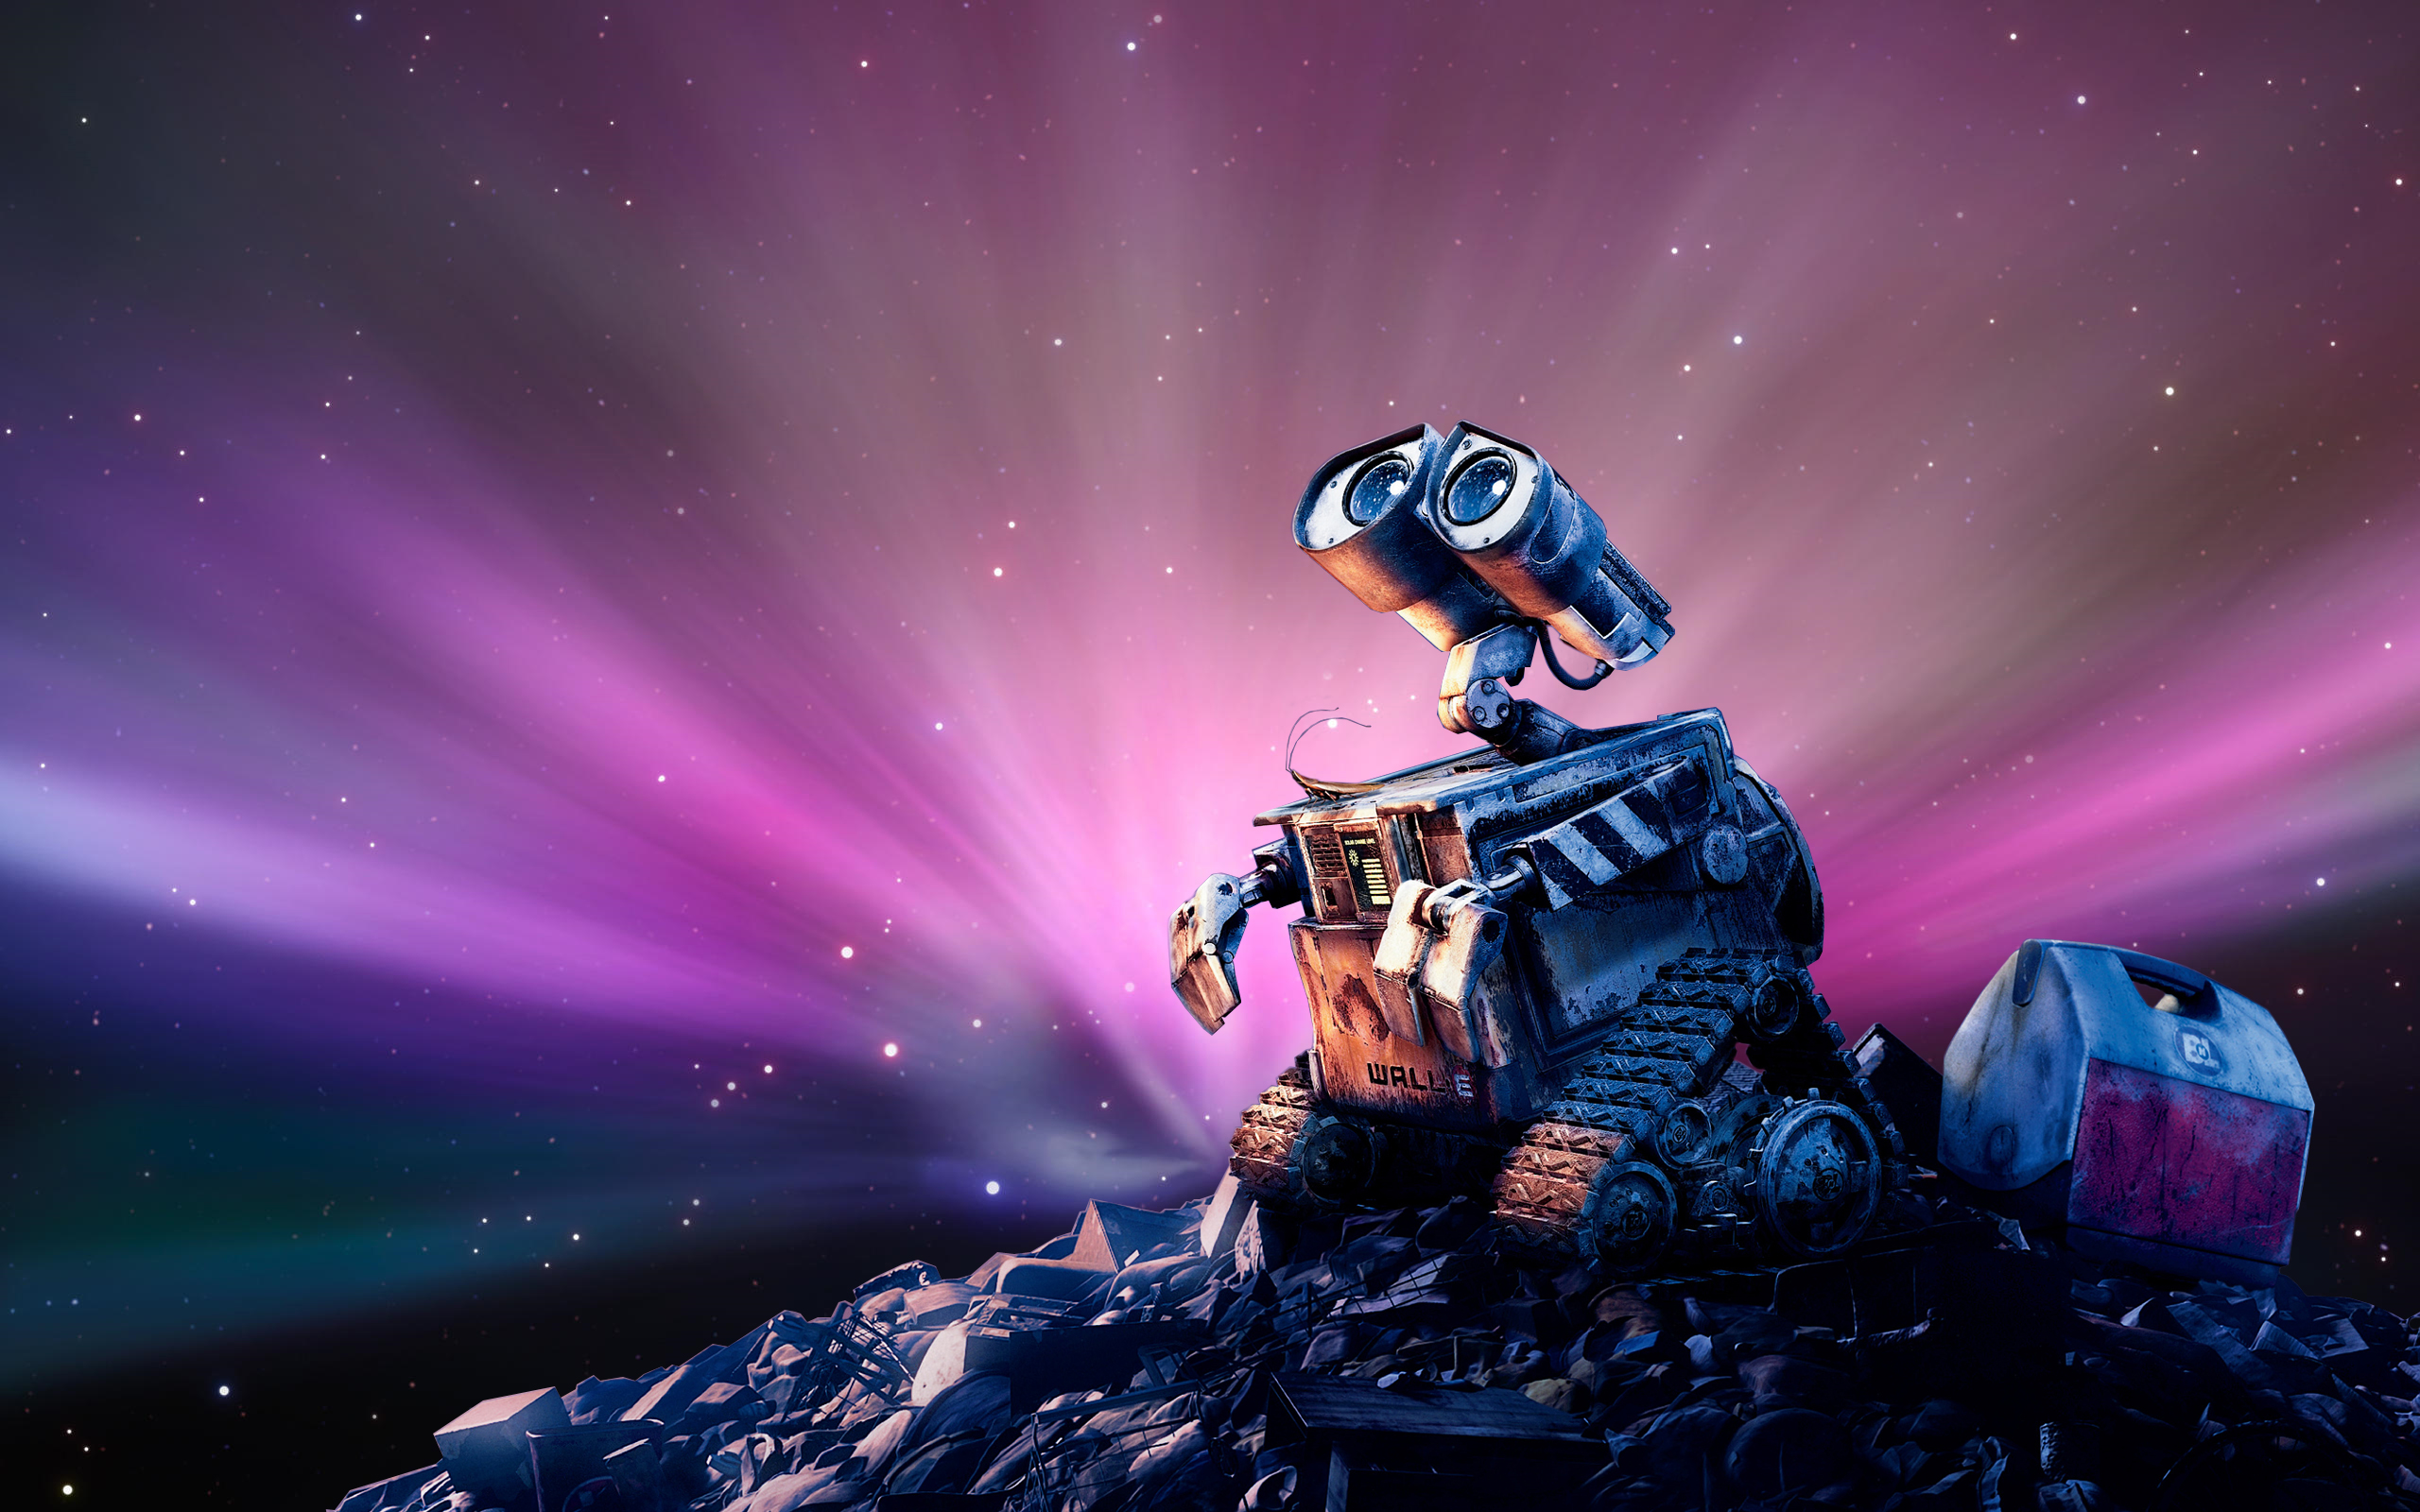 Wall E wallpapers HD  Download Free backgrounds